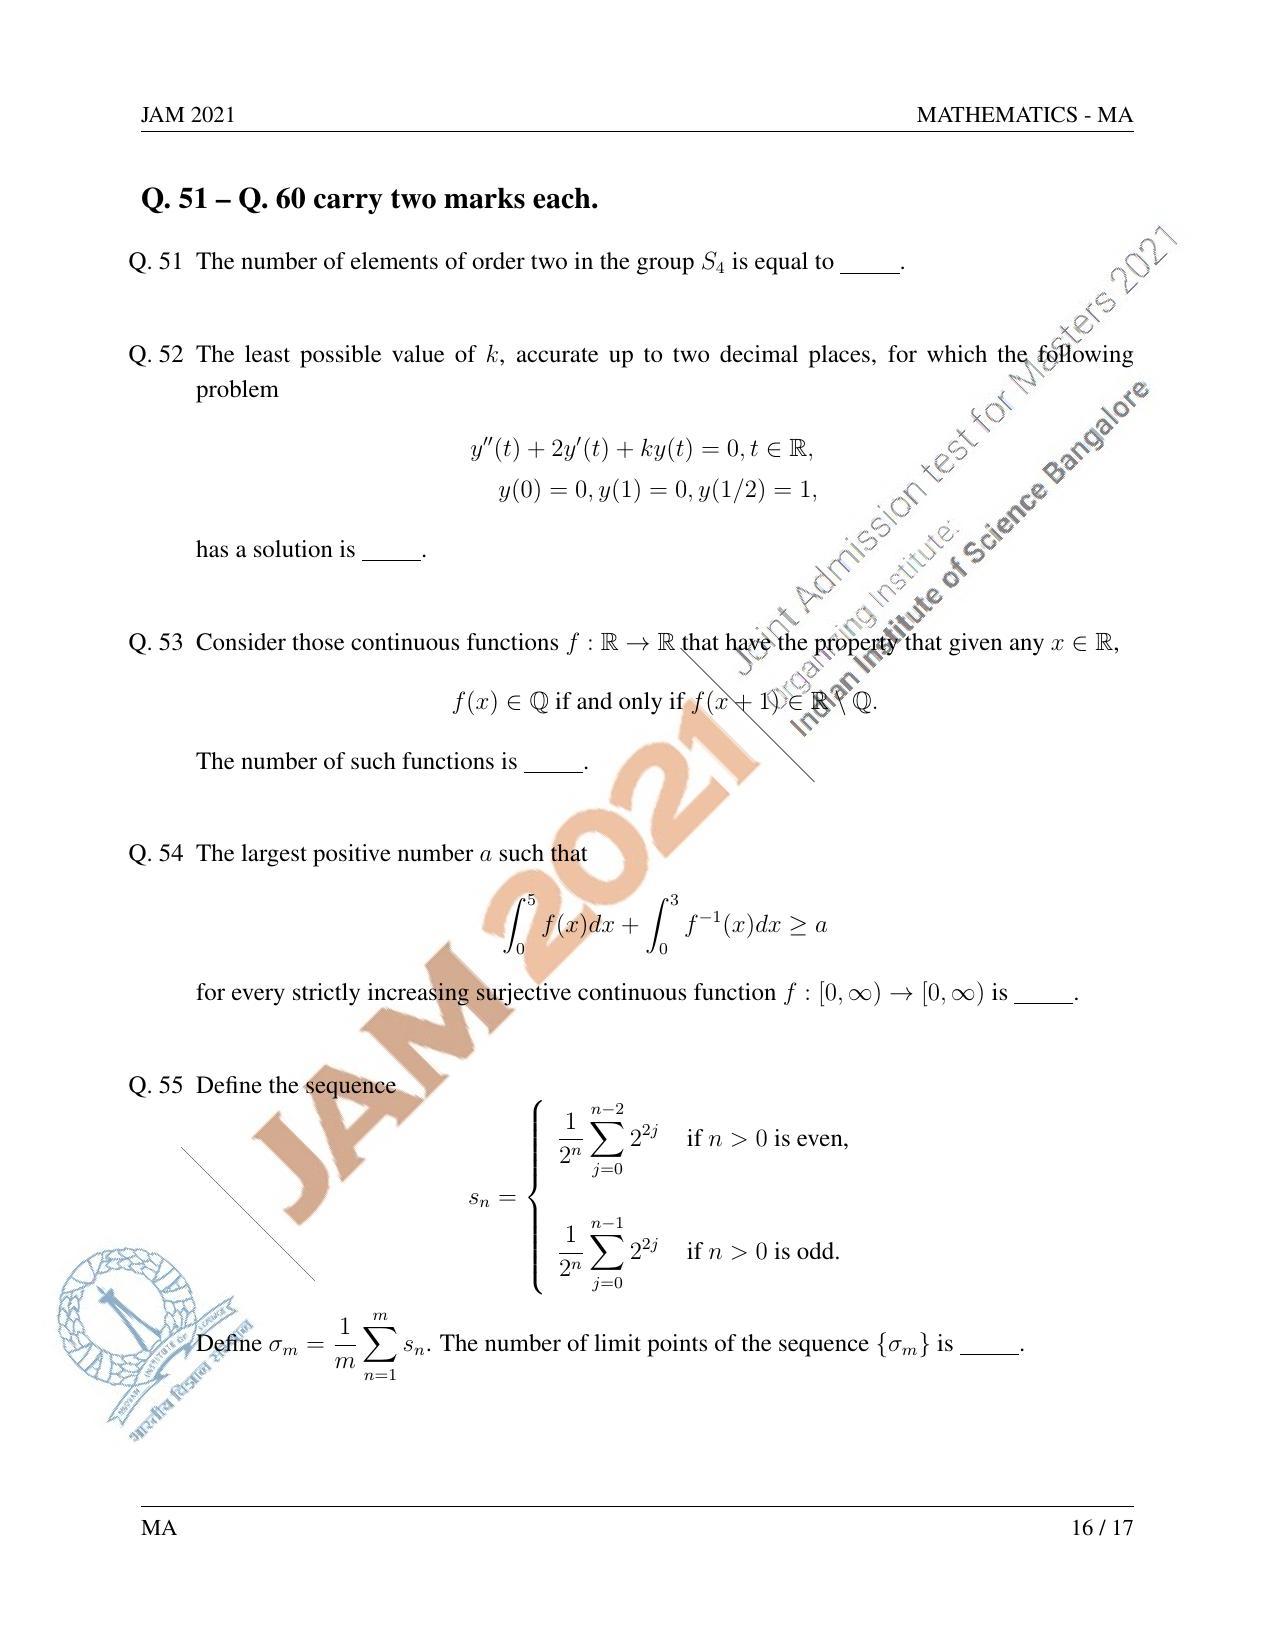 JAM 2021: MA Question Paper - Page 17